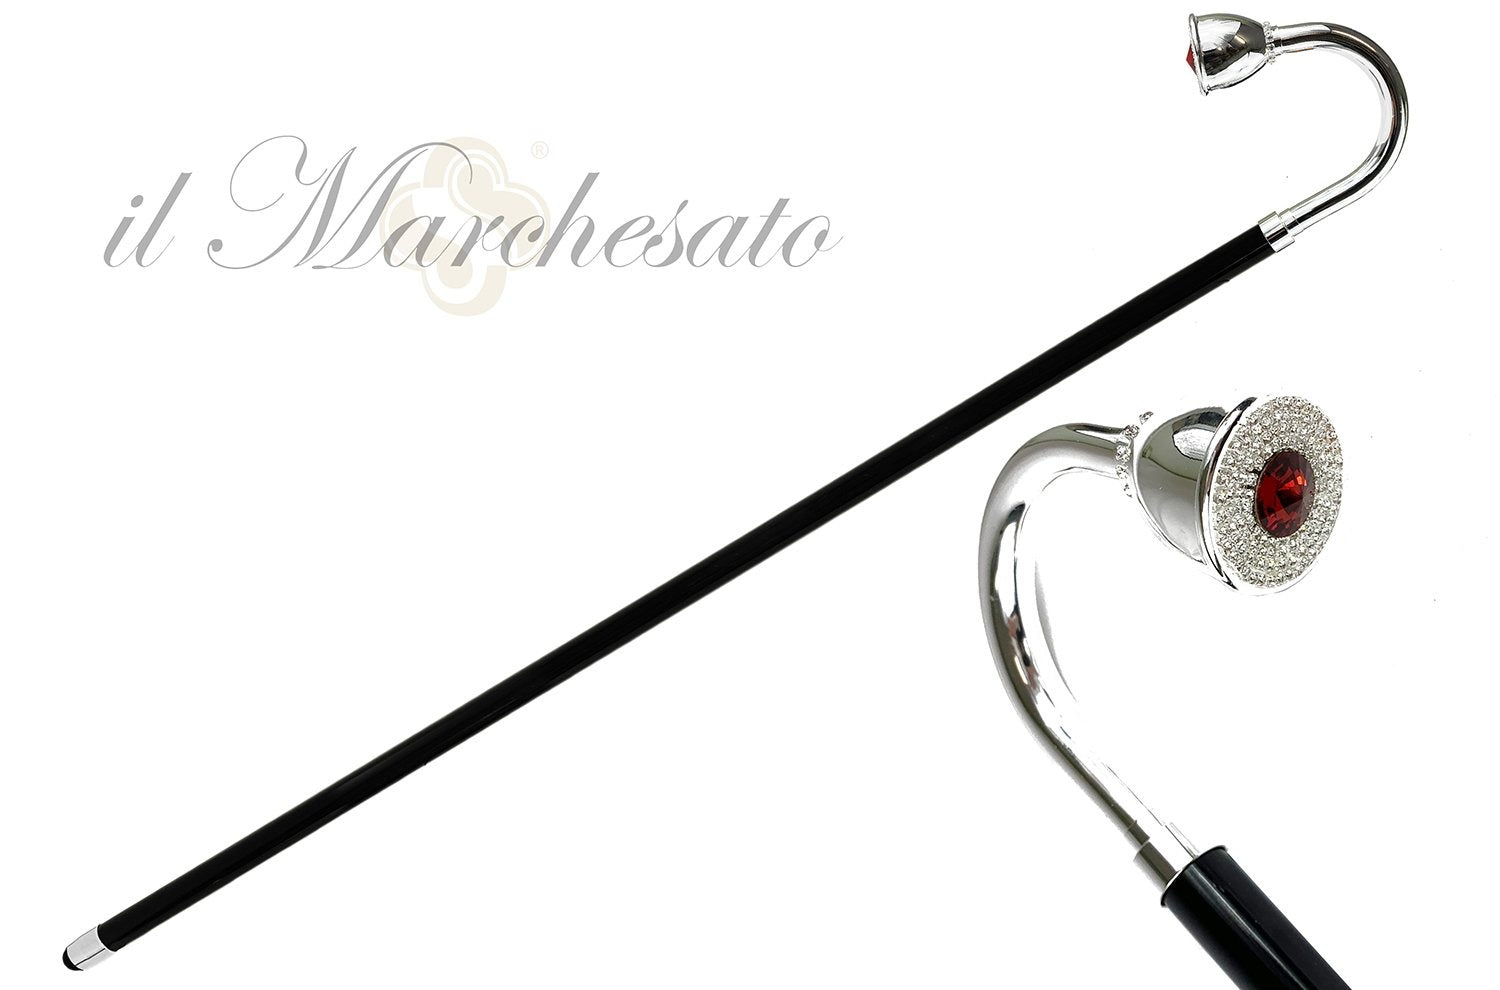 Curved Walking cane in silver-plated brass - IL MARCHESATO LUXURY UMBRELLAS, CANES AND SHOEHORNS